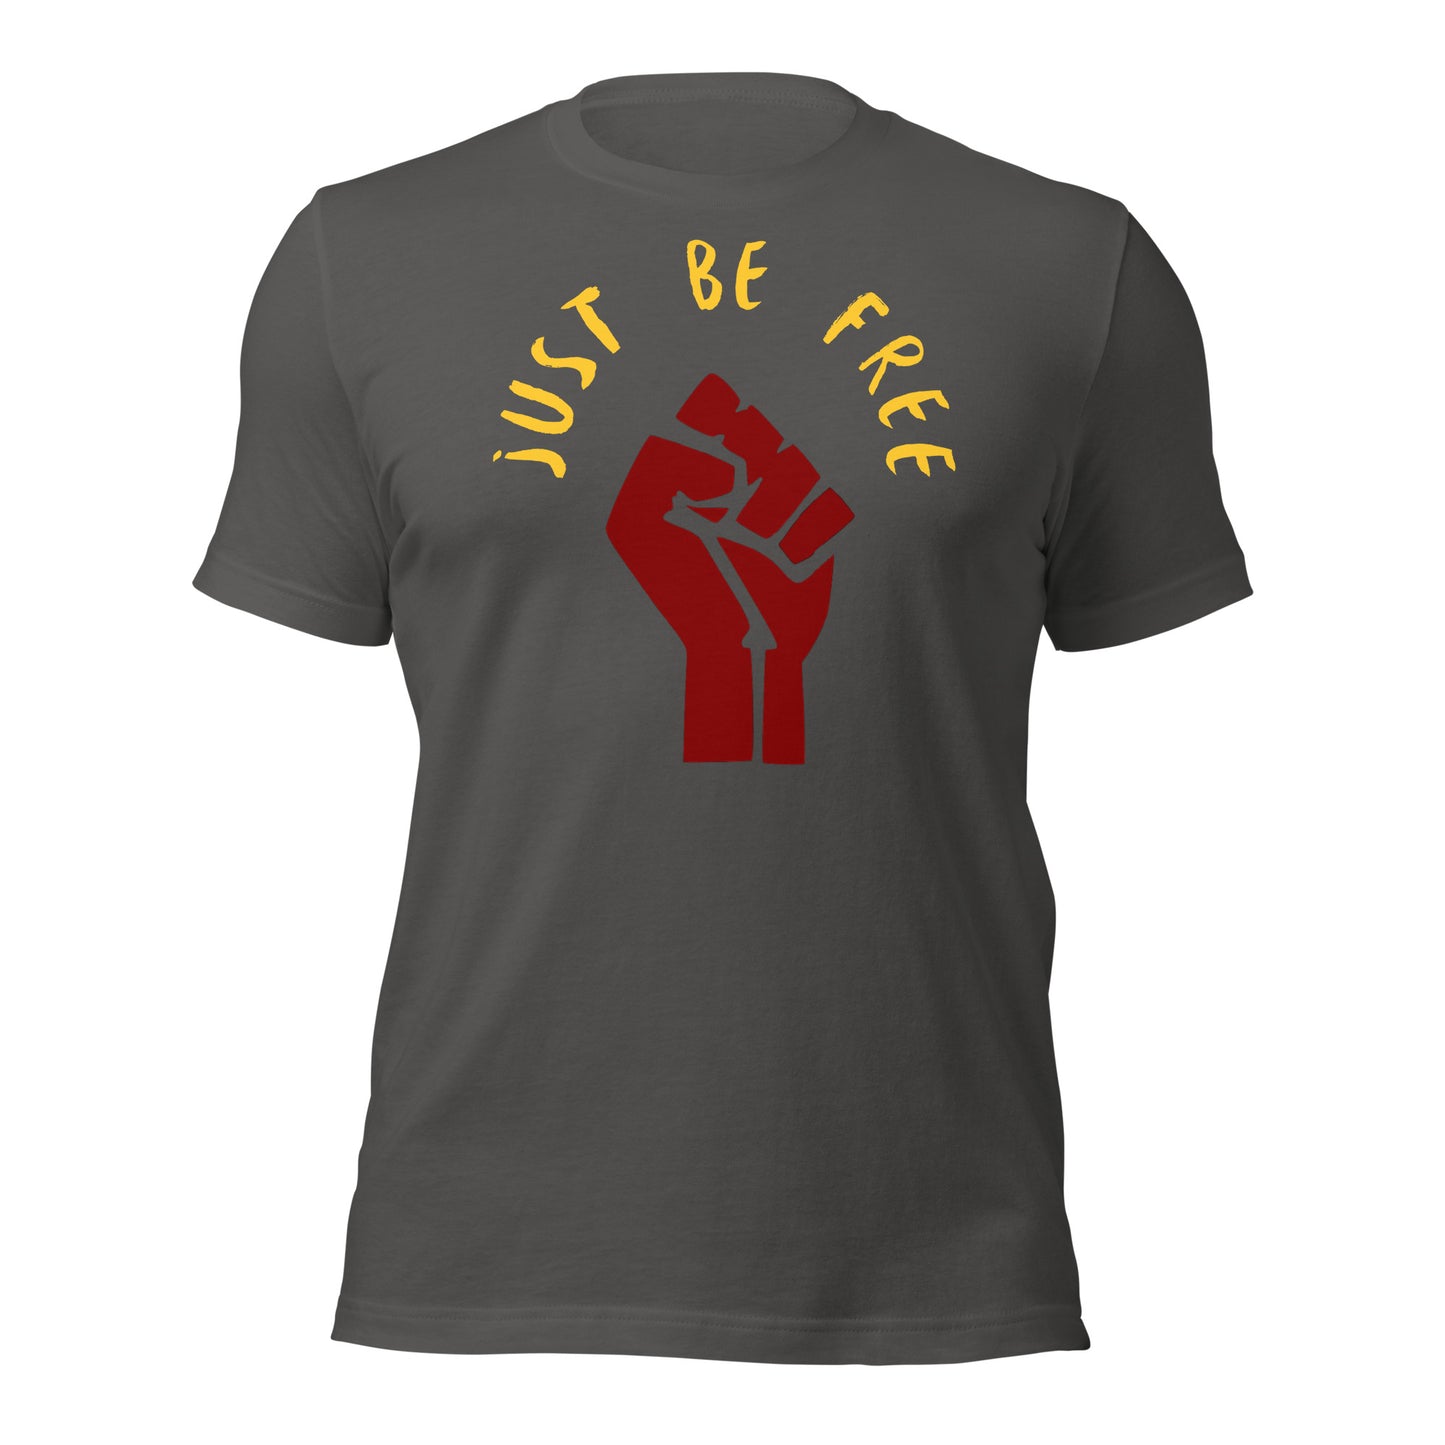 Anarchy Wear "Just Be Free" Unity Unisex t-shirt